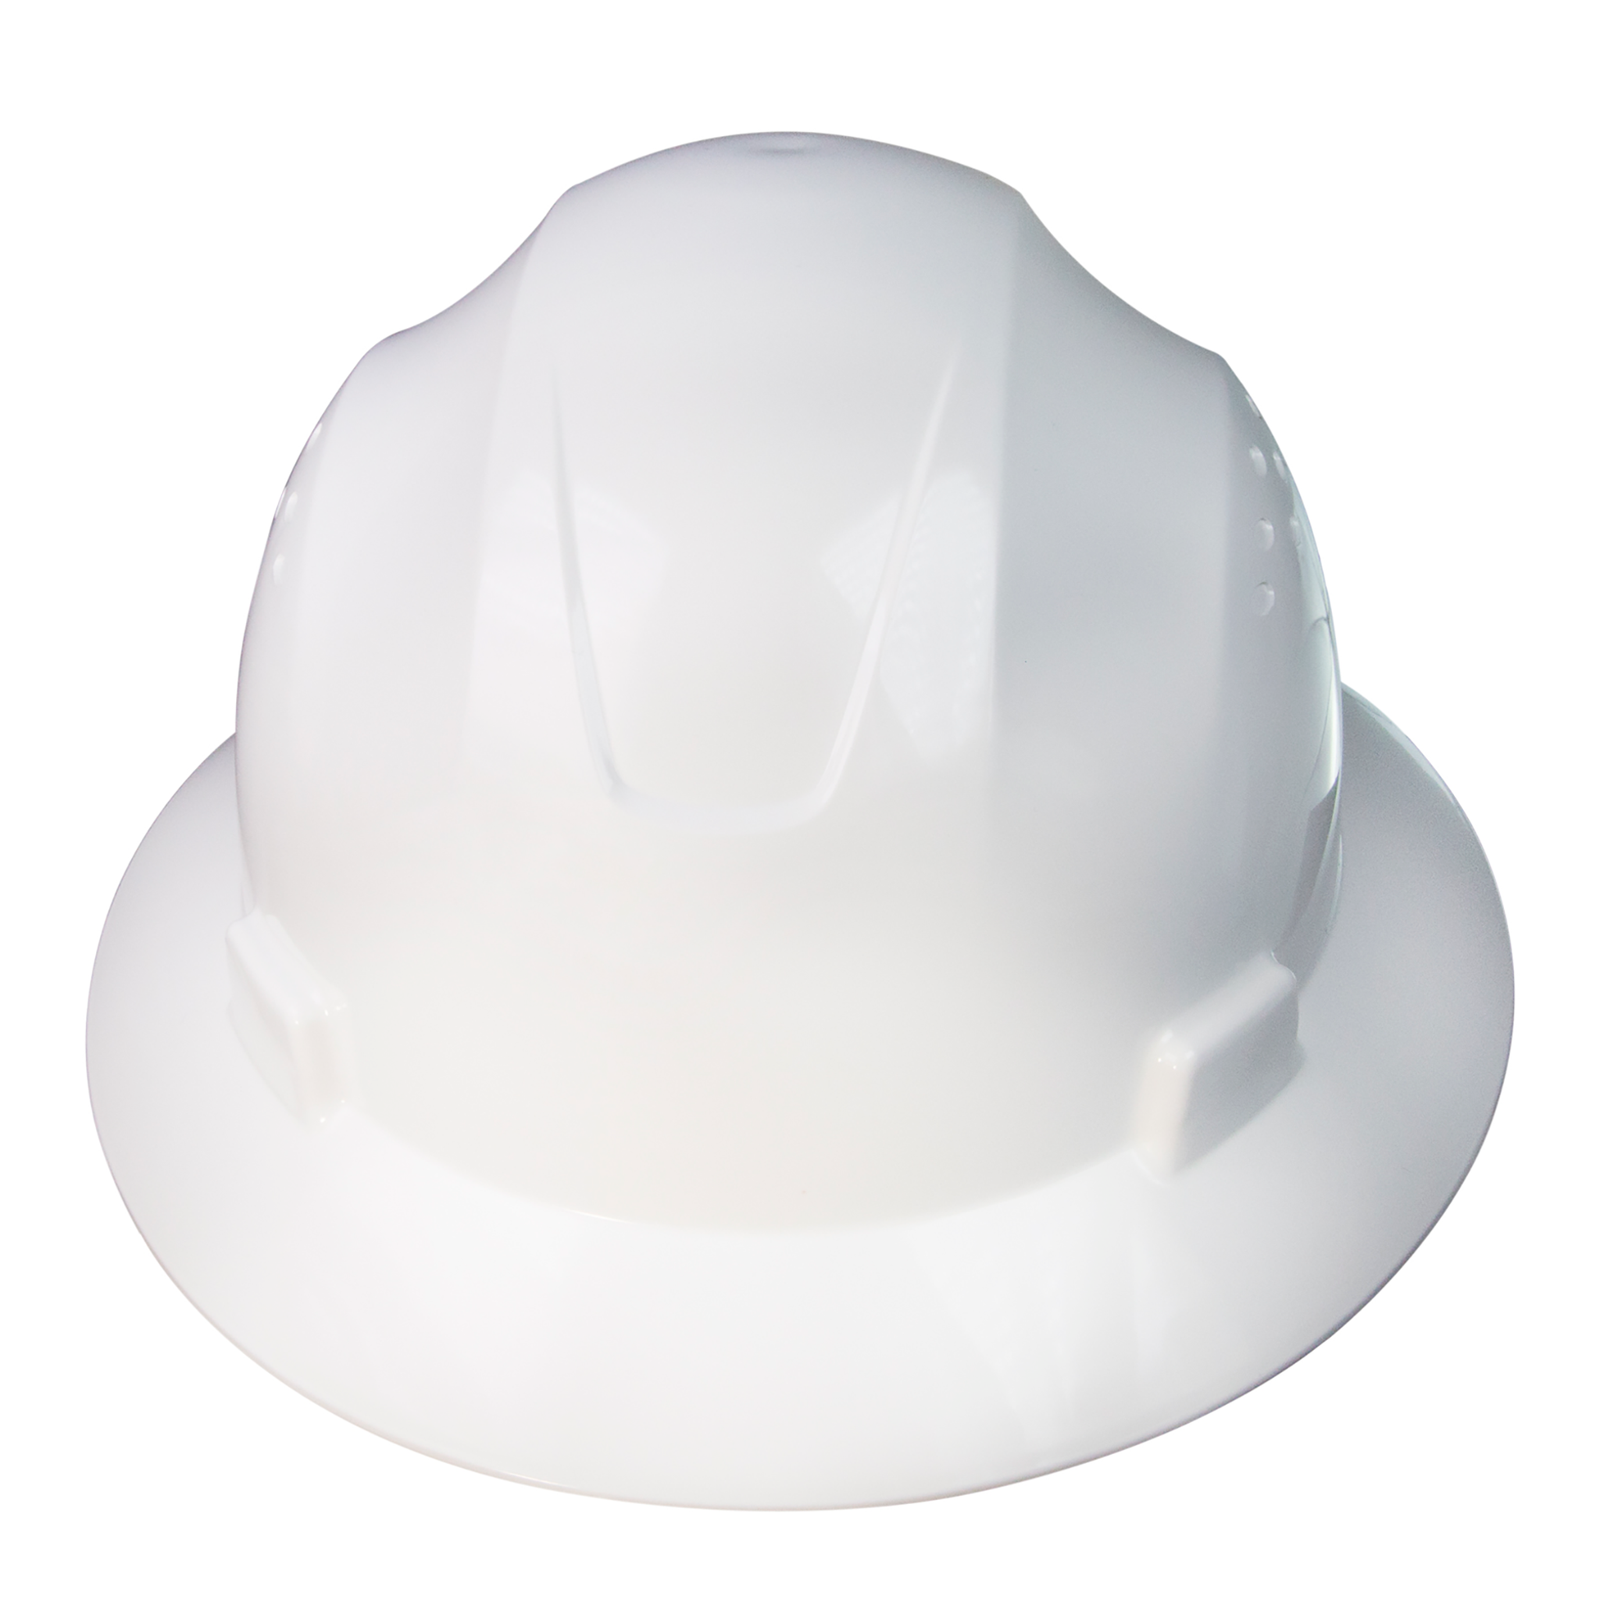 Front view of a JORESTECH full brim white safety hard hat with 4 point suspension